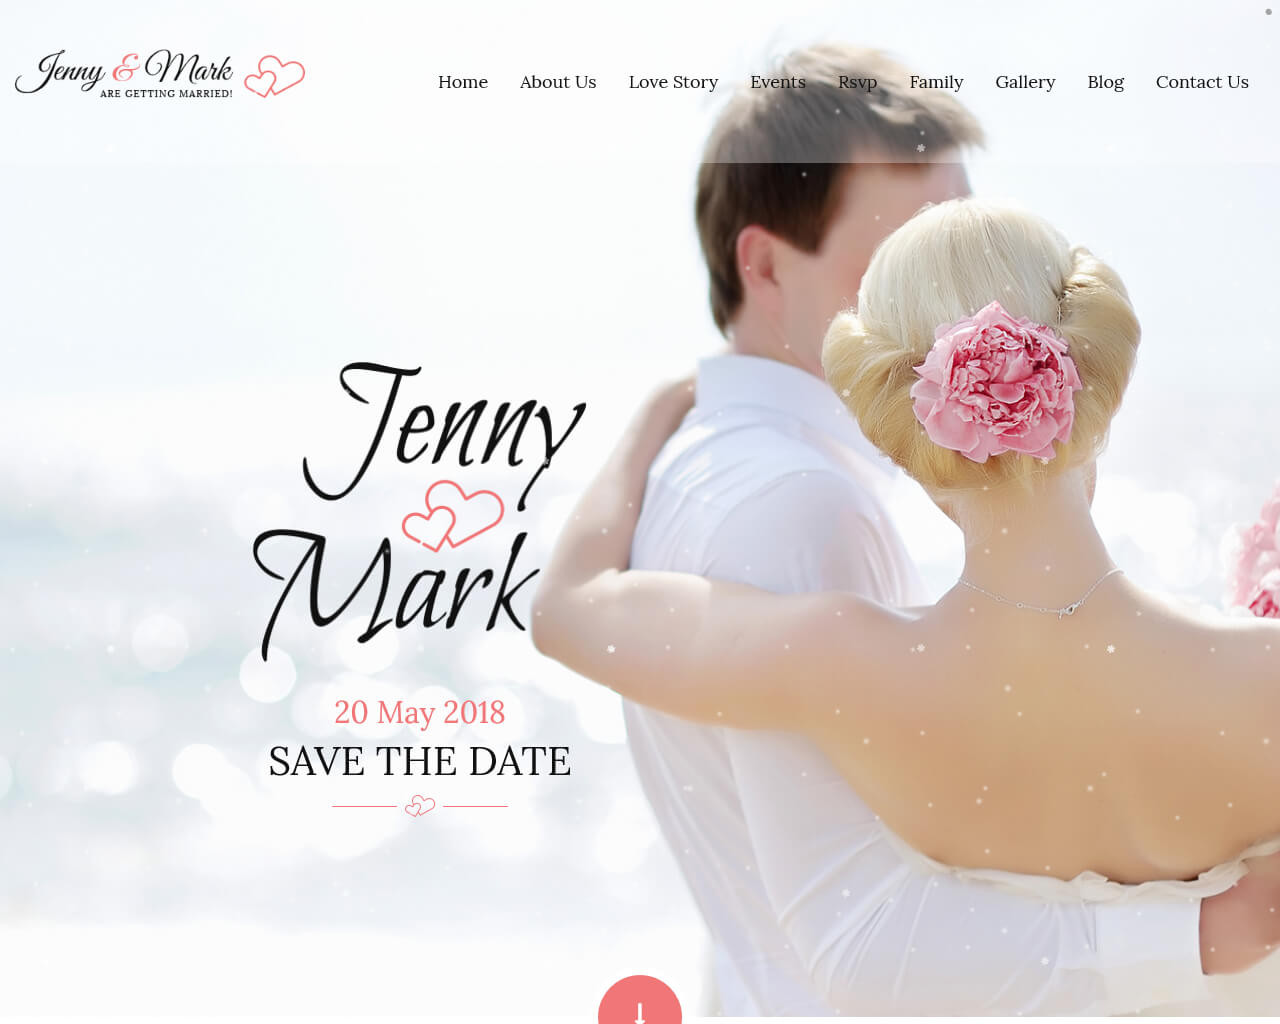 Wedding Invitation Website
 20 Best Wedding Website Templates for your Special Day